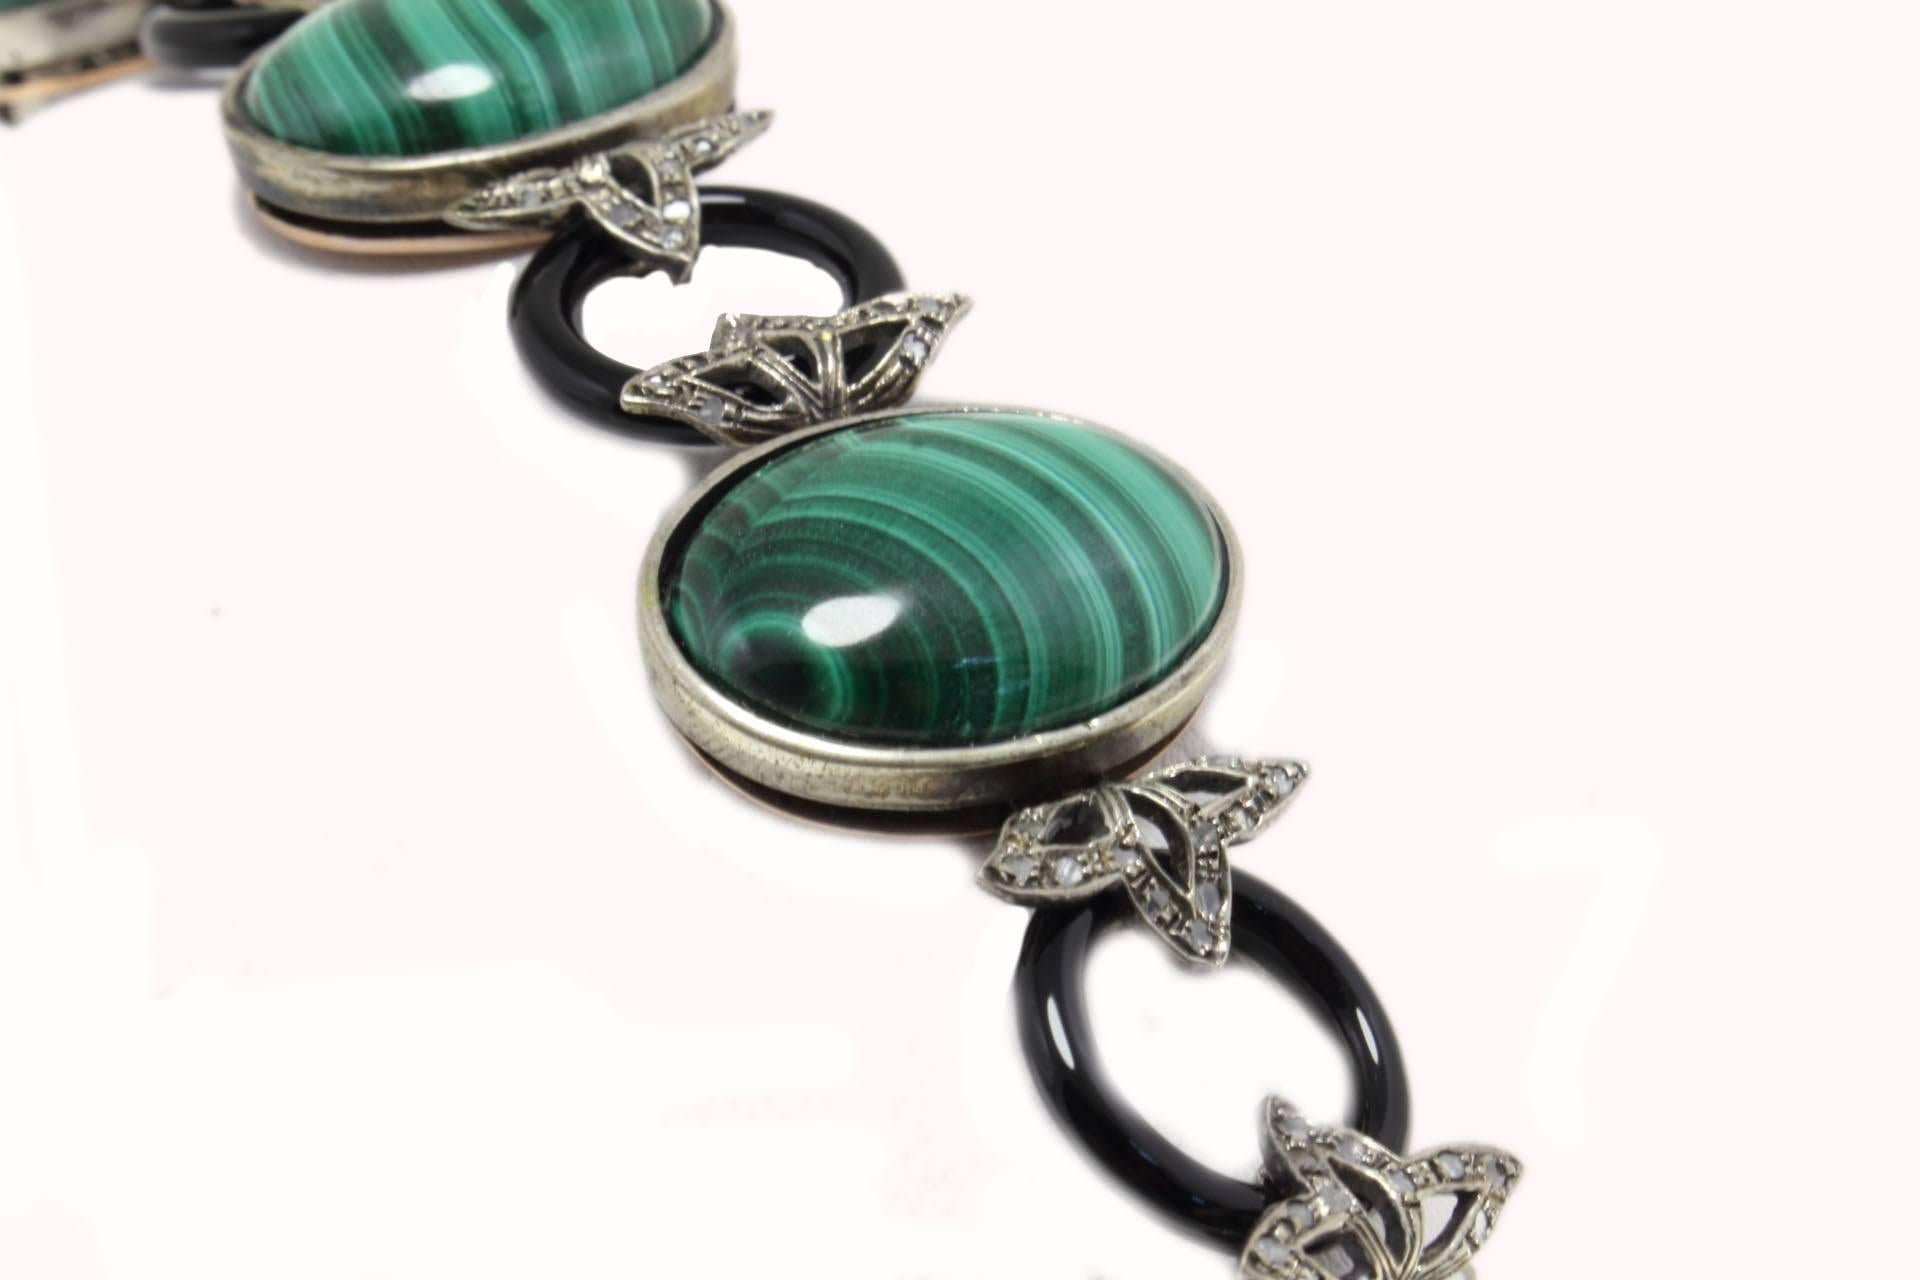 Amazing link bracelet composed of onyx circle that's links to a malachite stones with leaves of diamonds. All is mounted in 9 kt rose gold and silver.
Tot Weight 37 g
Onyx and Malachite 17.14 g 
Diamonds 0.61 ct

Rf. gahf